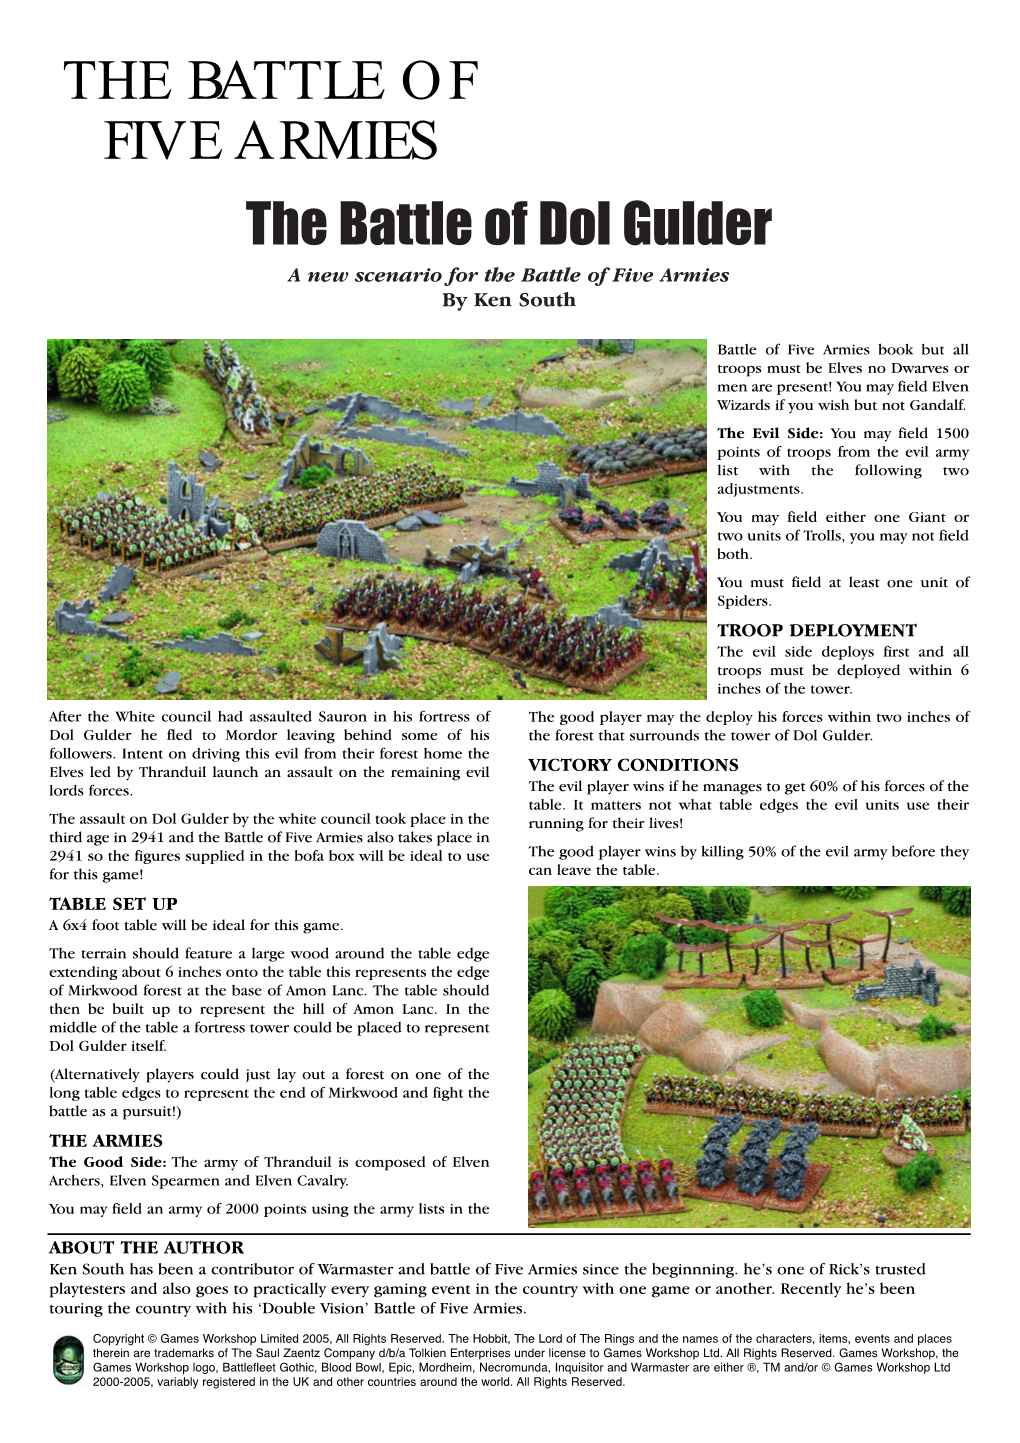 THE BATTLE of FIVE ARMIES the Battle of Dol Gulder a New Scenario for the Battle of Five Armies by Ken South